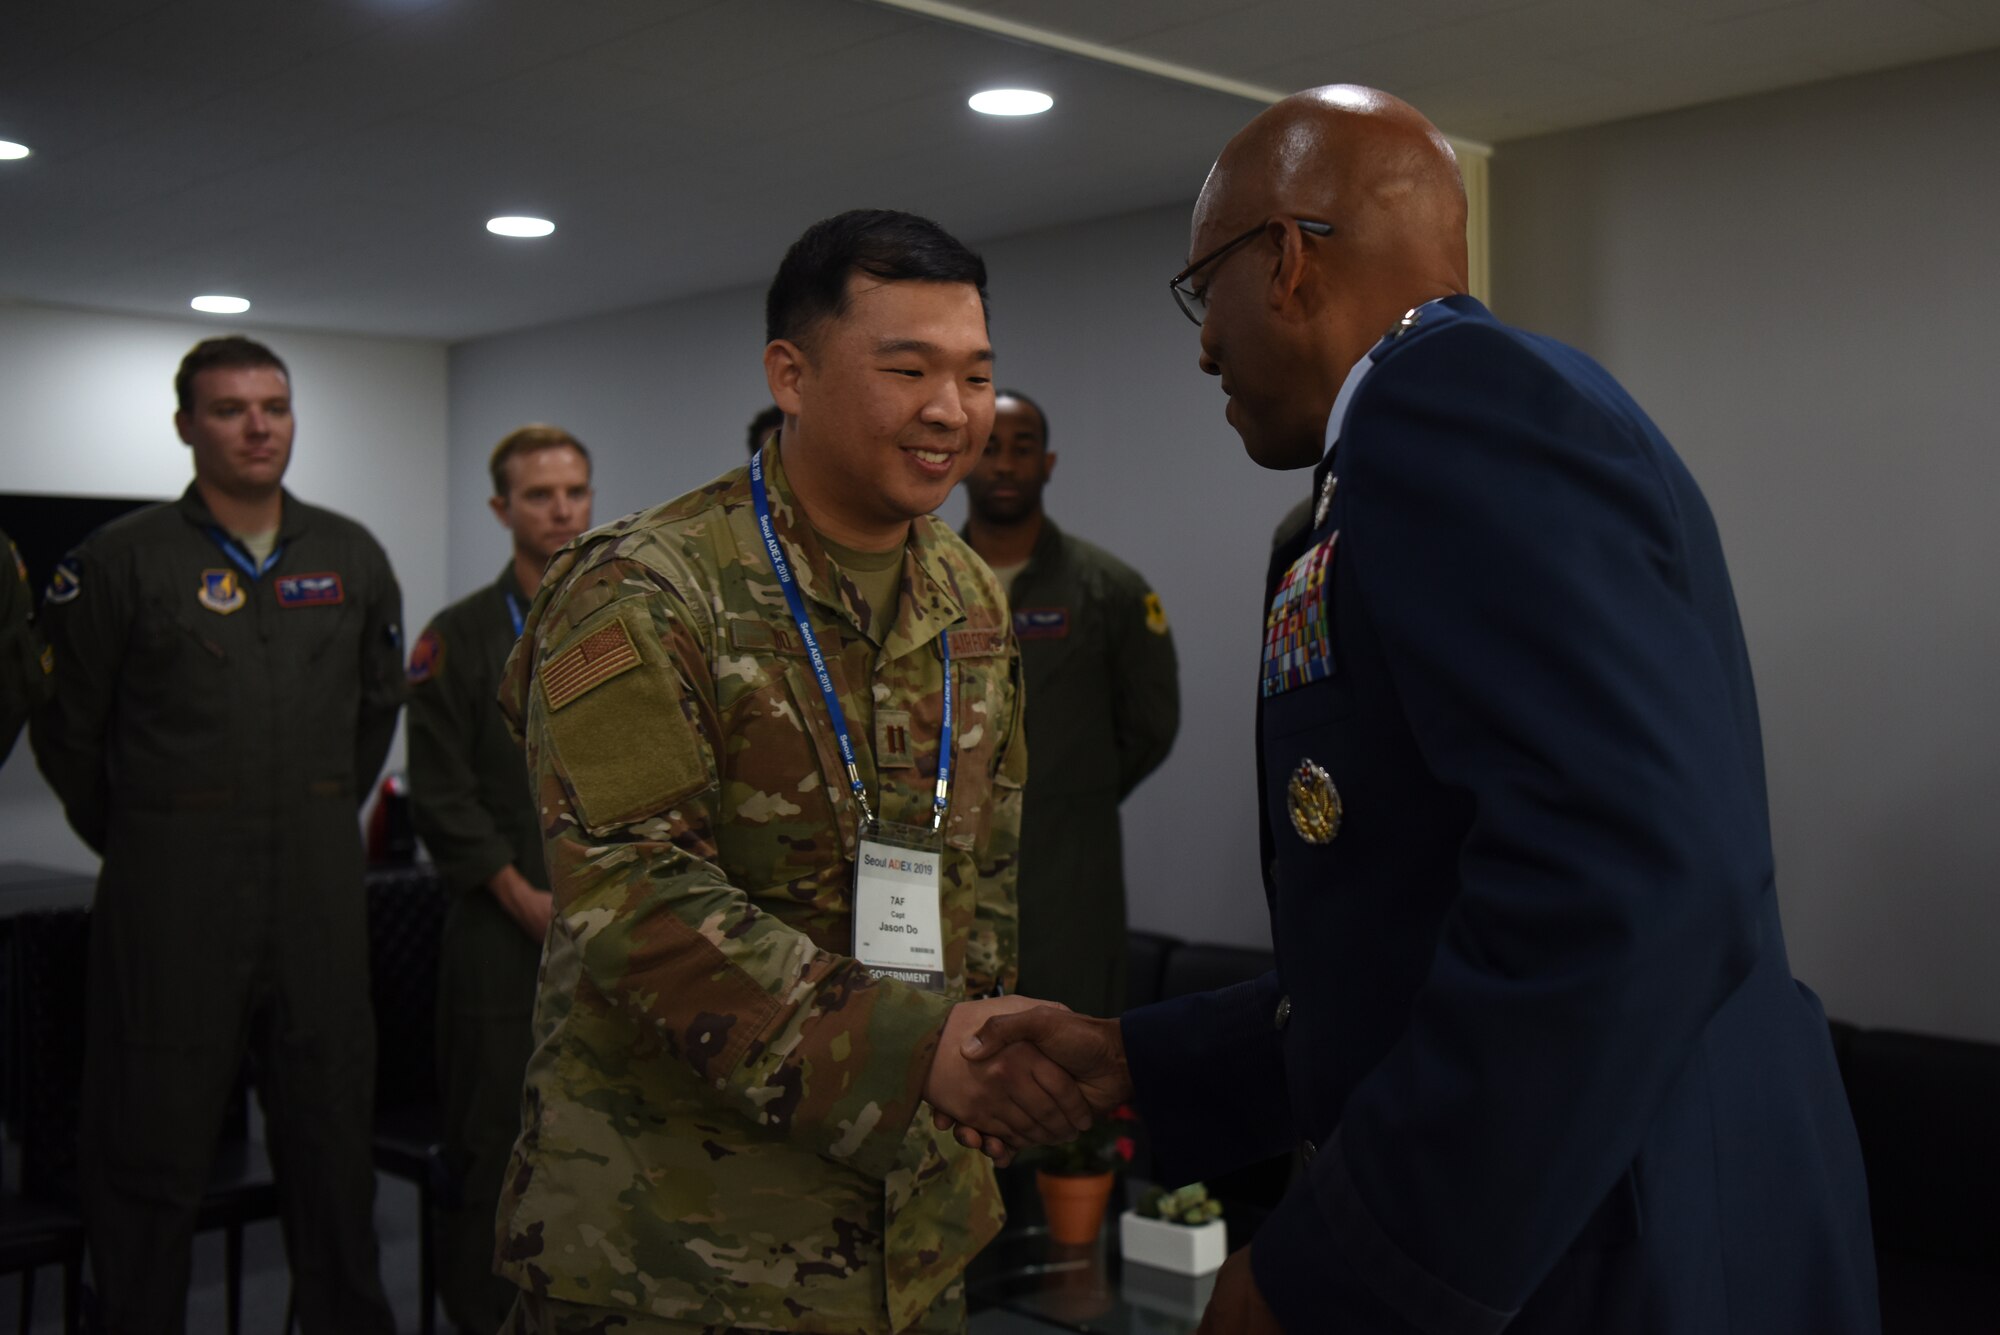 Gen. CQ. Brown, Jr., Pacific Air Forces commander, greets a U.S.Airman during the Seoul International Aerospace and Defense Exhibition 2019 at the Seoul Airport, Republic of Korea, October 16, 2019. Two PACAF Airmen were recognized for their instrumental roles in setting up U.S. participation at Seoul ADEX 2019. (U.S. Air Force photo by Senior Airman Denise M. Jenson)